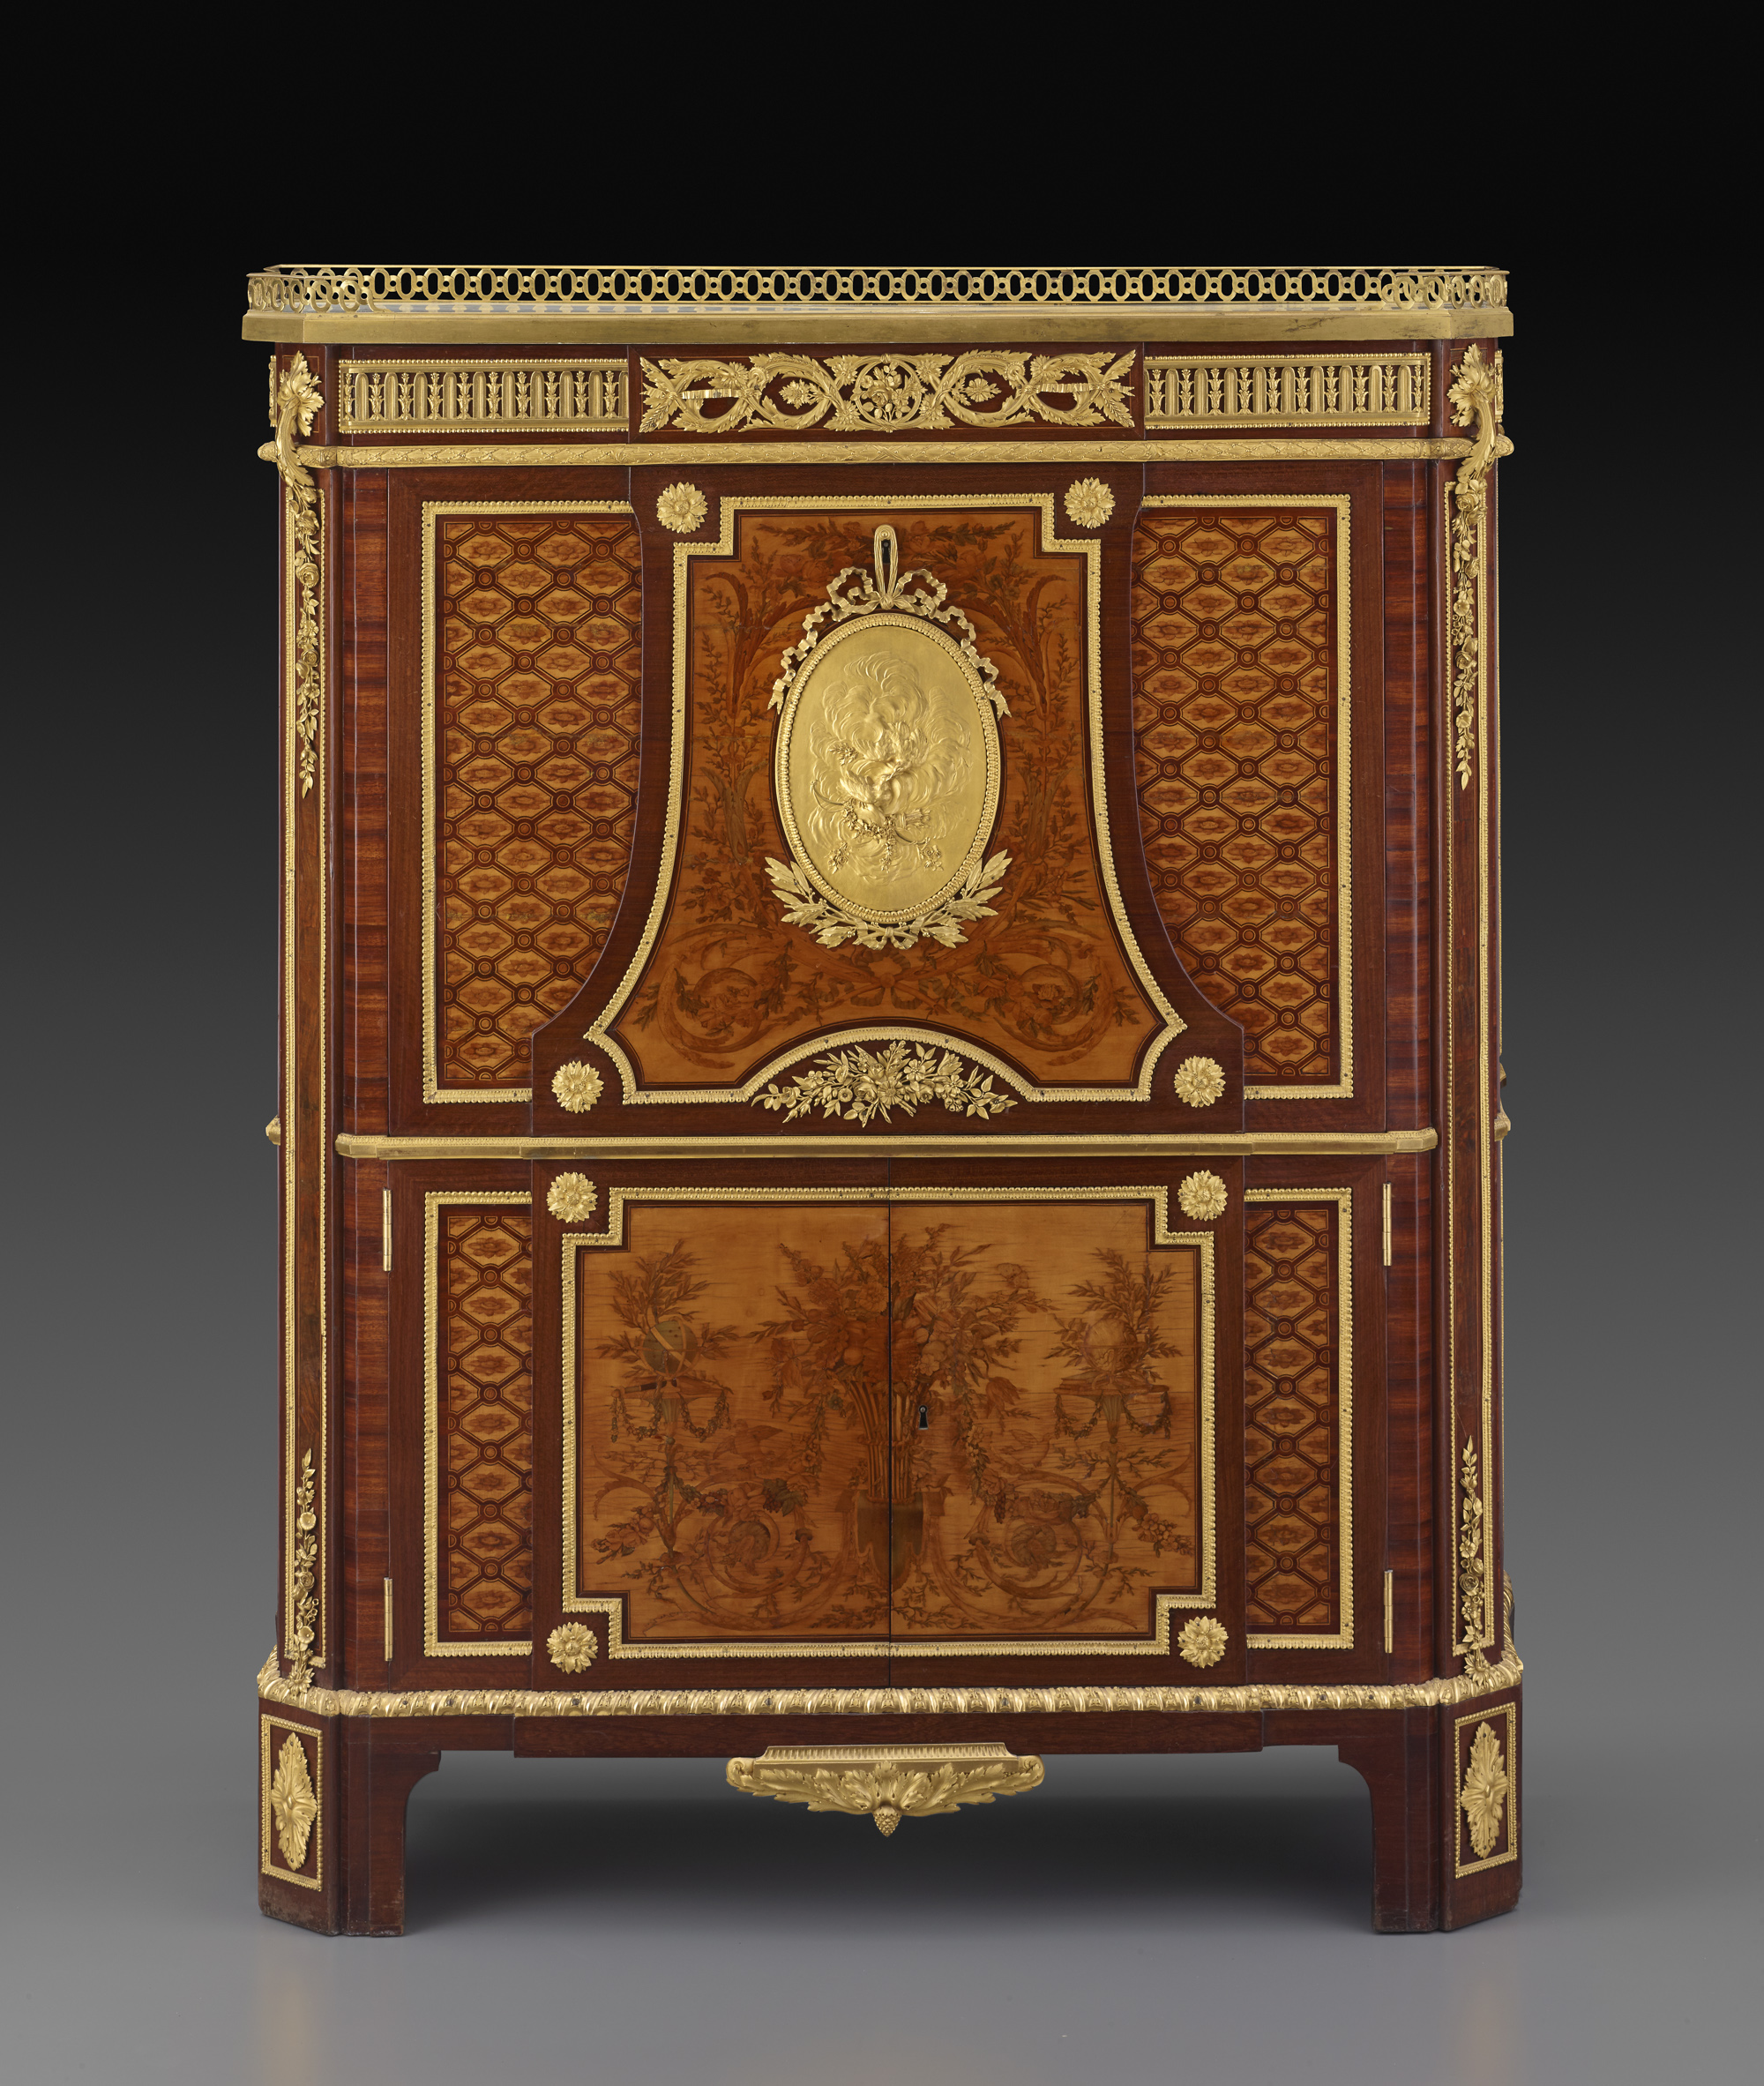 Secretaire by Jean-Henri Riesener - ca. 1780 and 1790 - 143.2 × 115.6 × 43.8 cm The Frick Collection